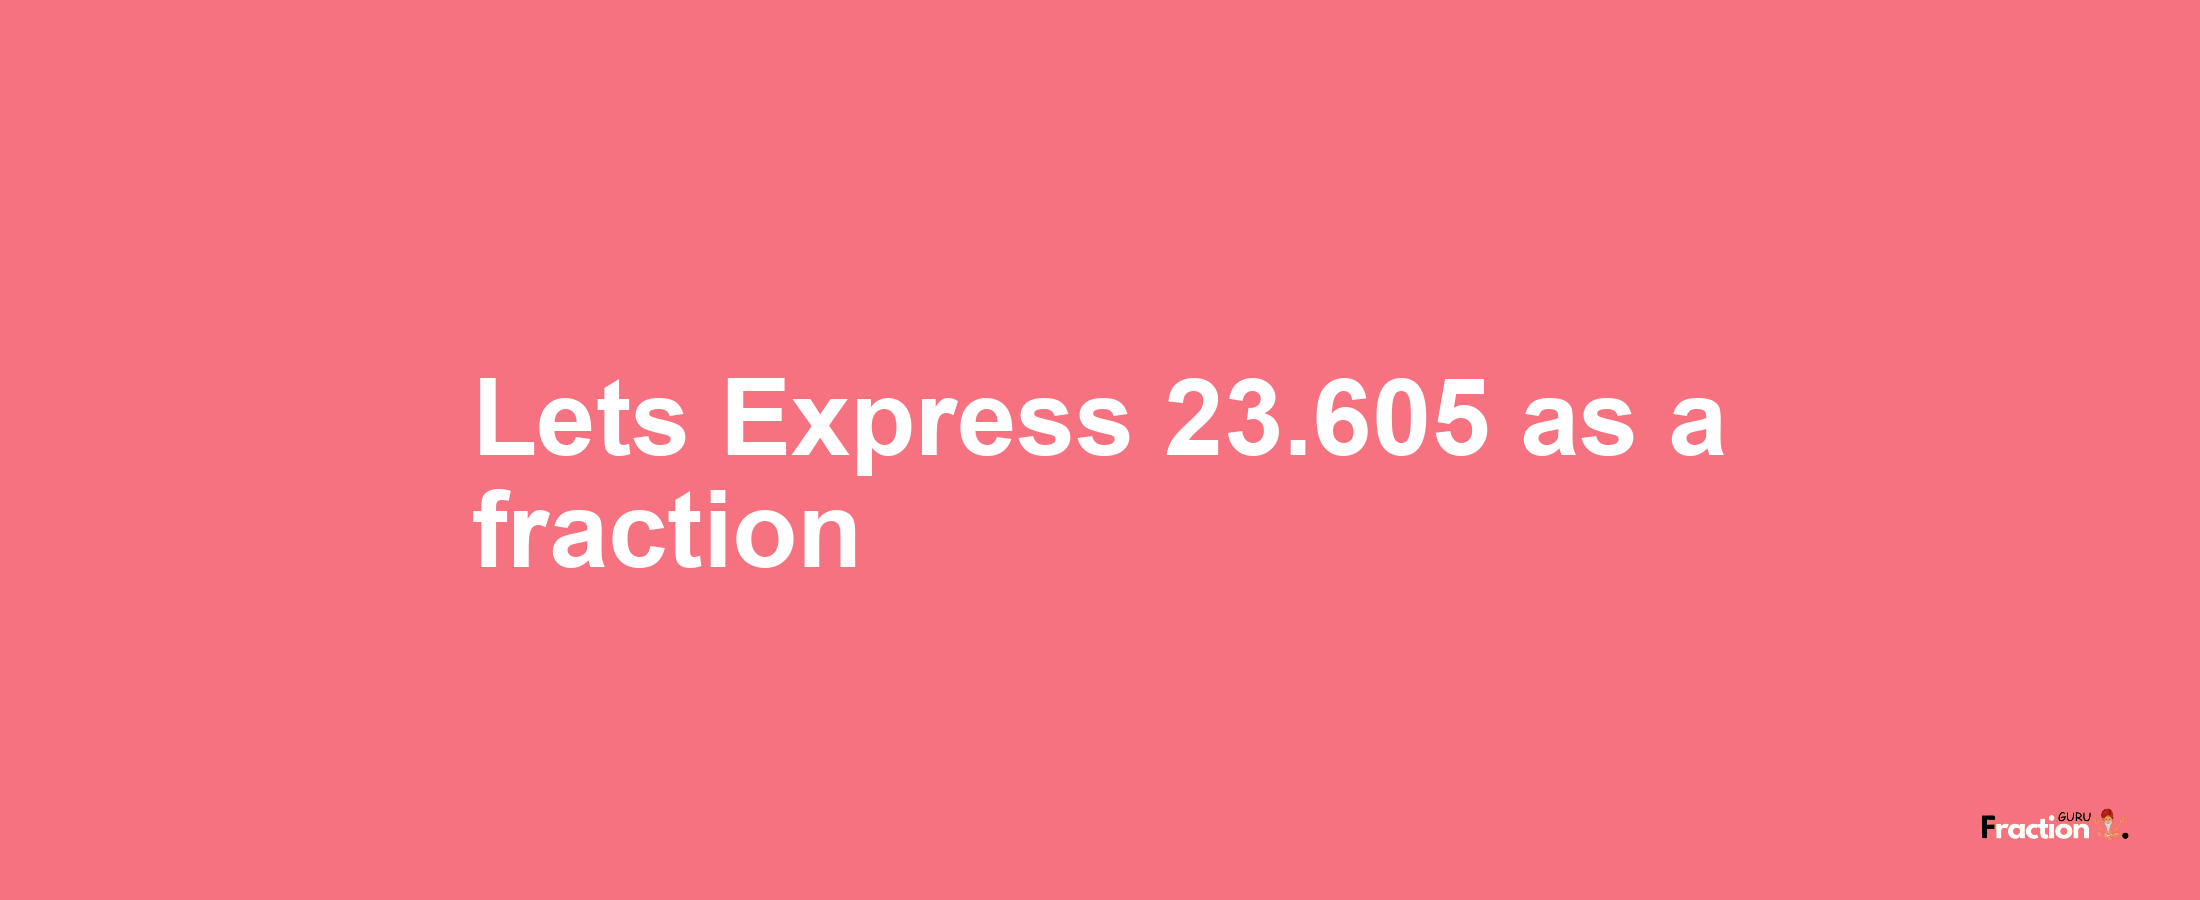 Lets Express 23.605 as afraction